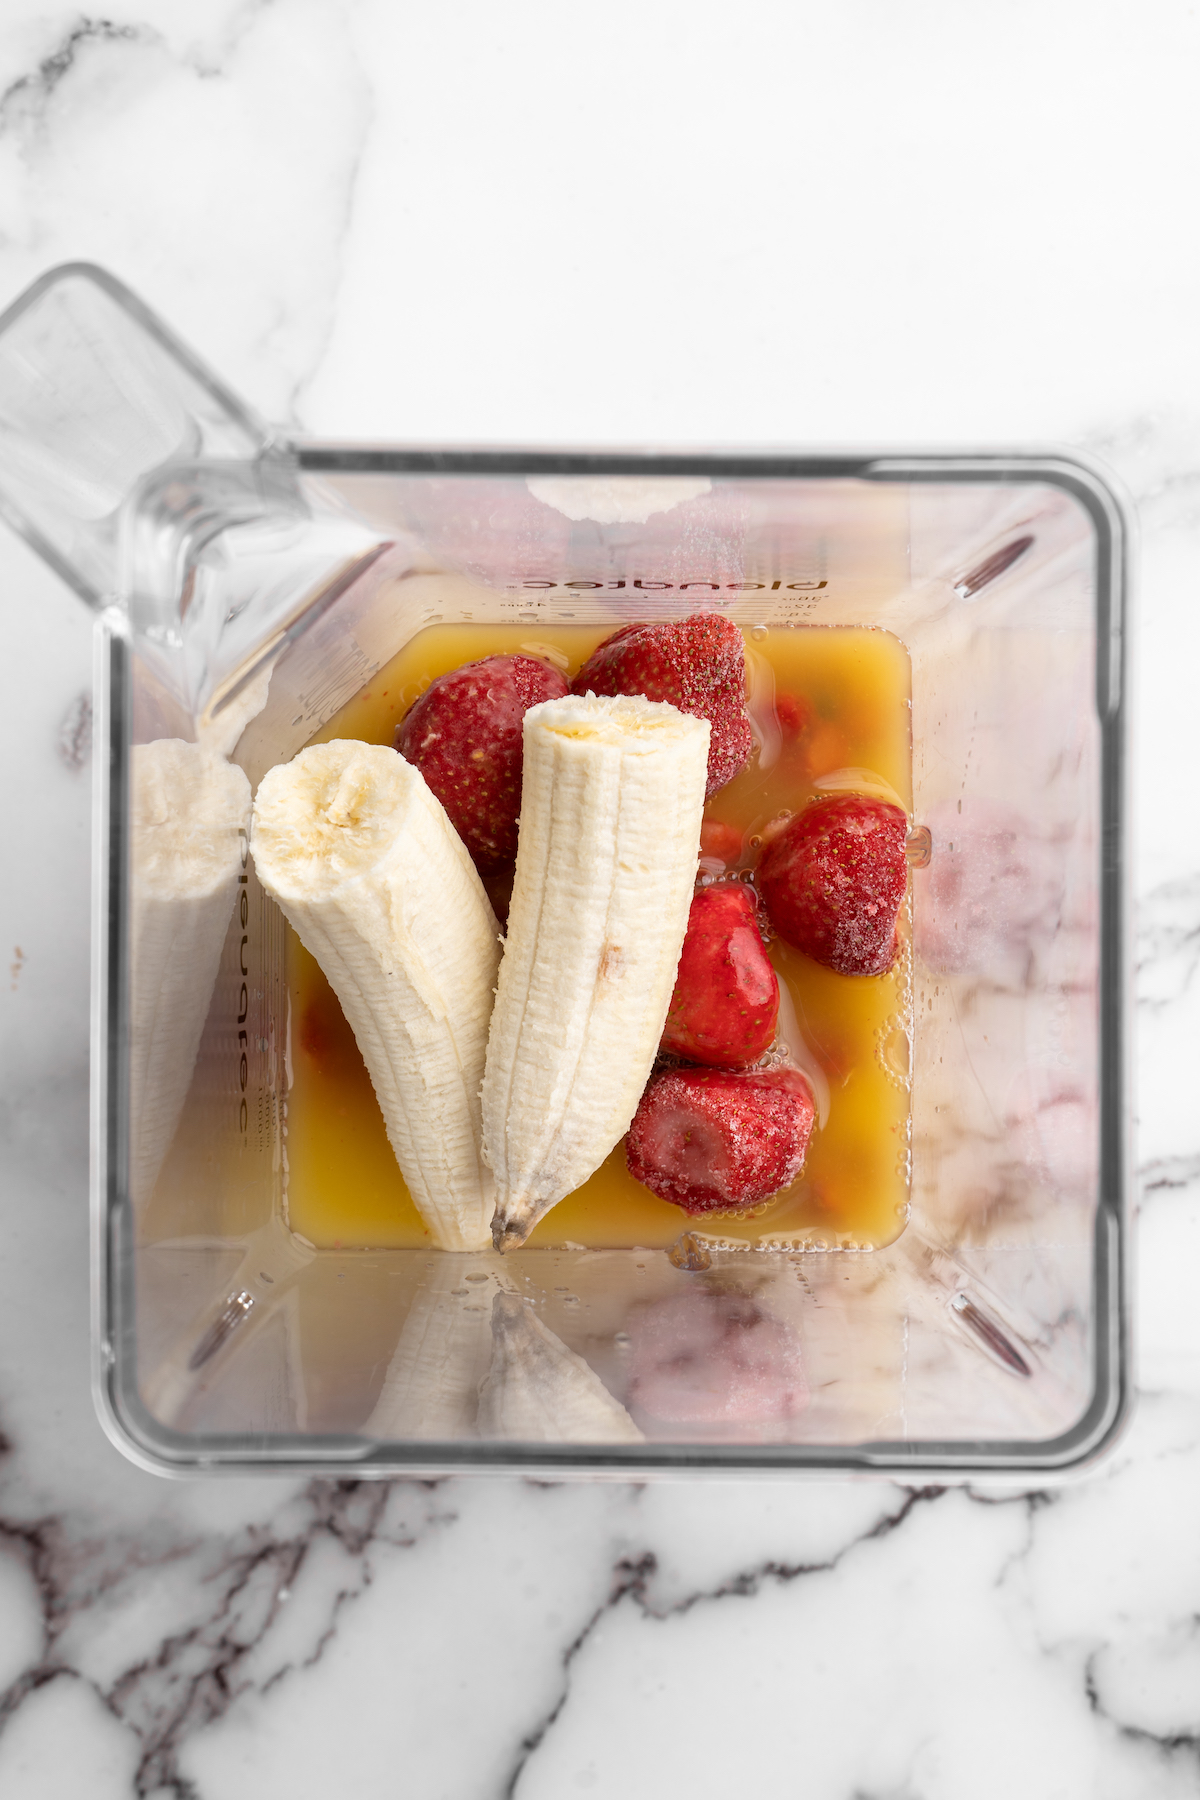 Overhead view of strawberry banana smoothie ingredients in blender